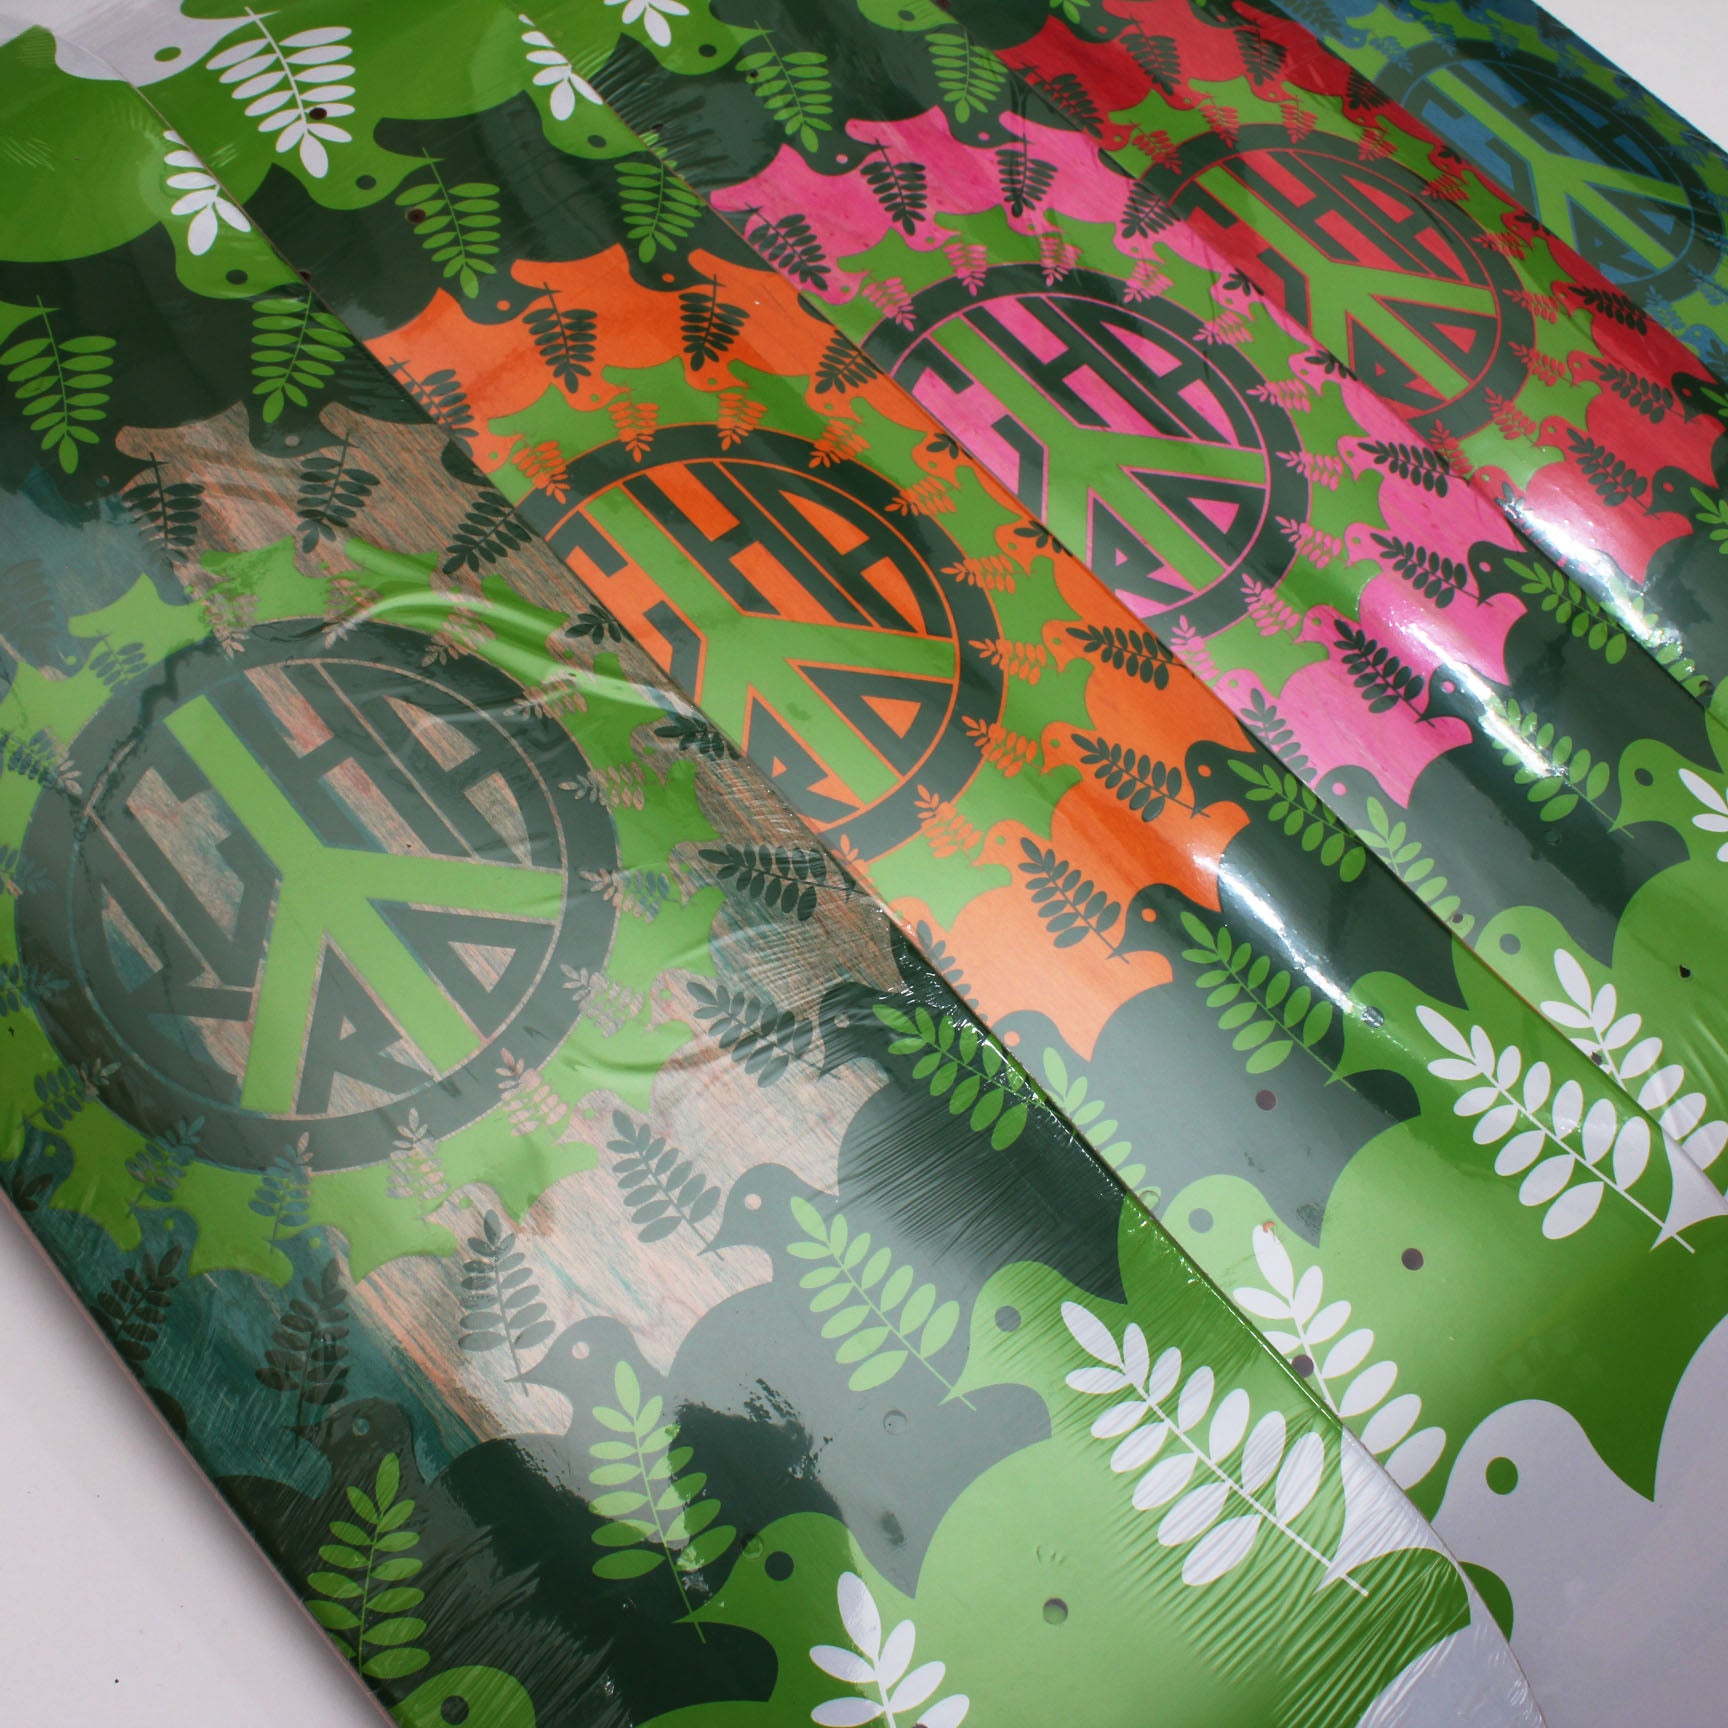 Orchard Peace by Damion Silver Deck 8.1"